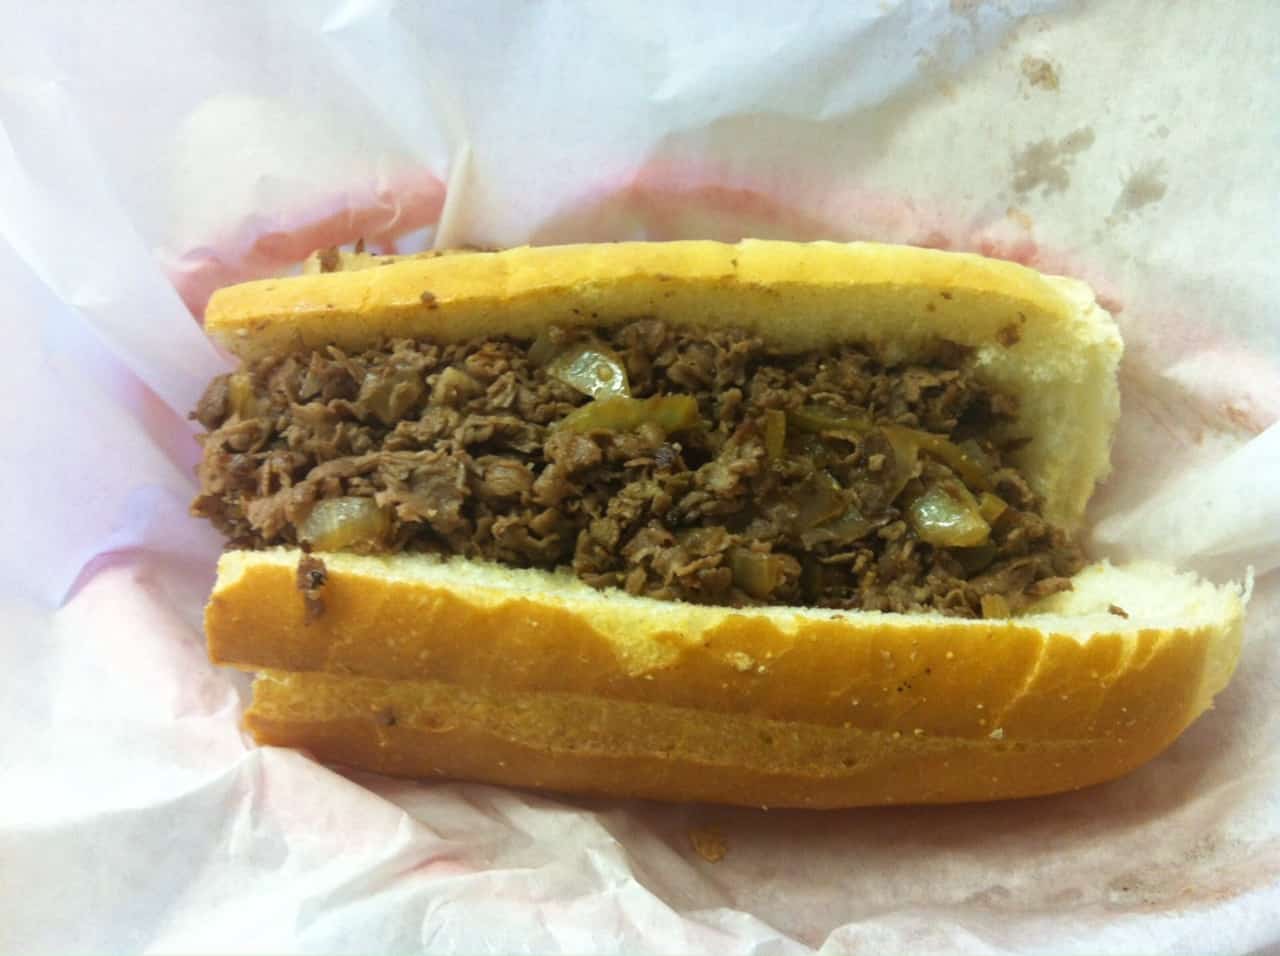 Cheese steak from Mike's